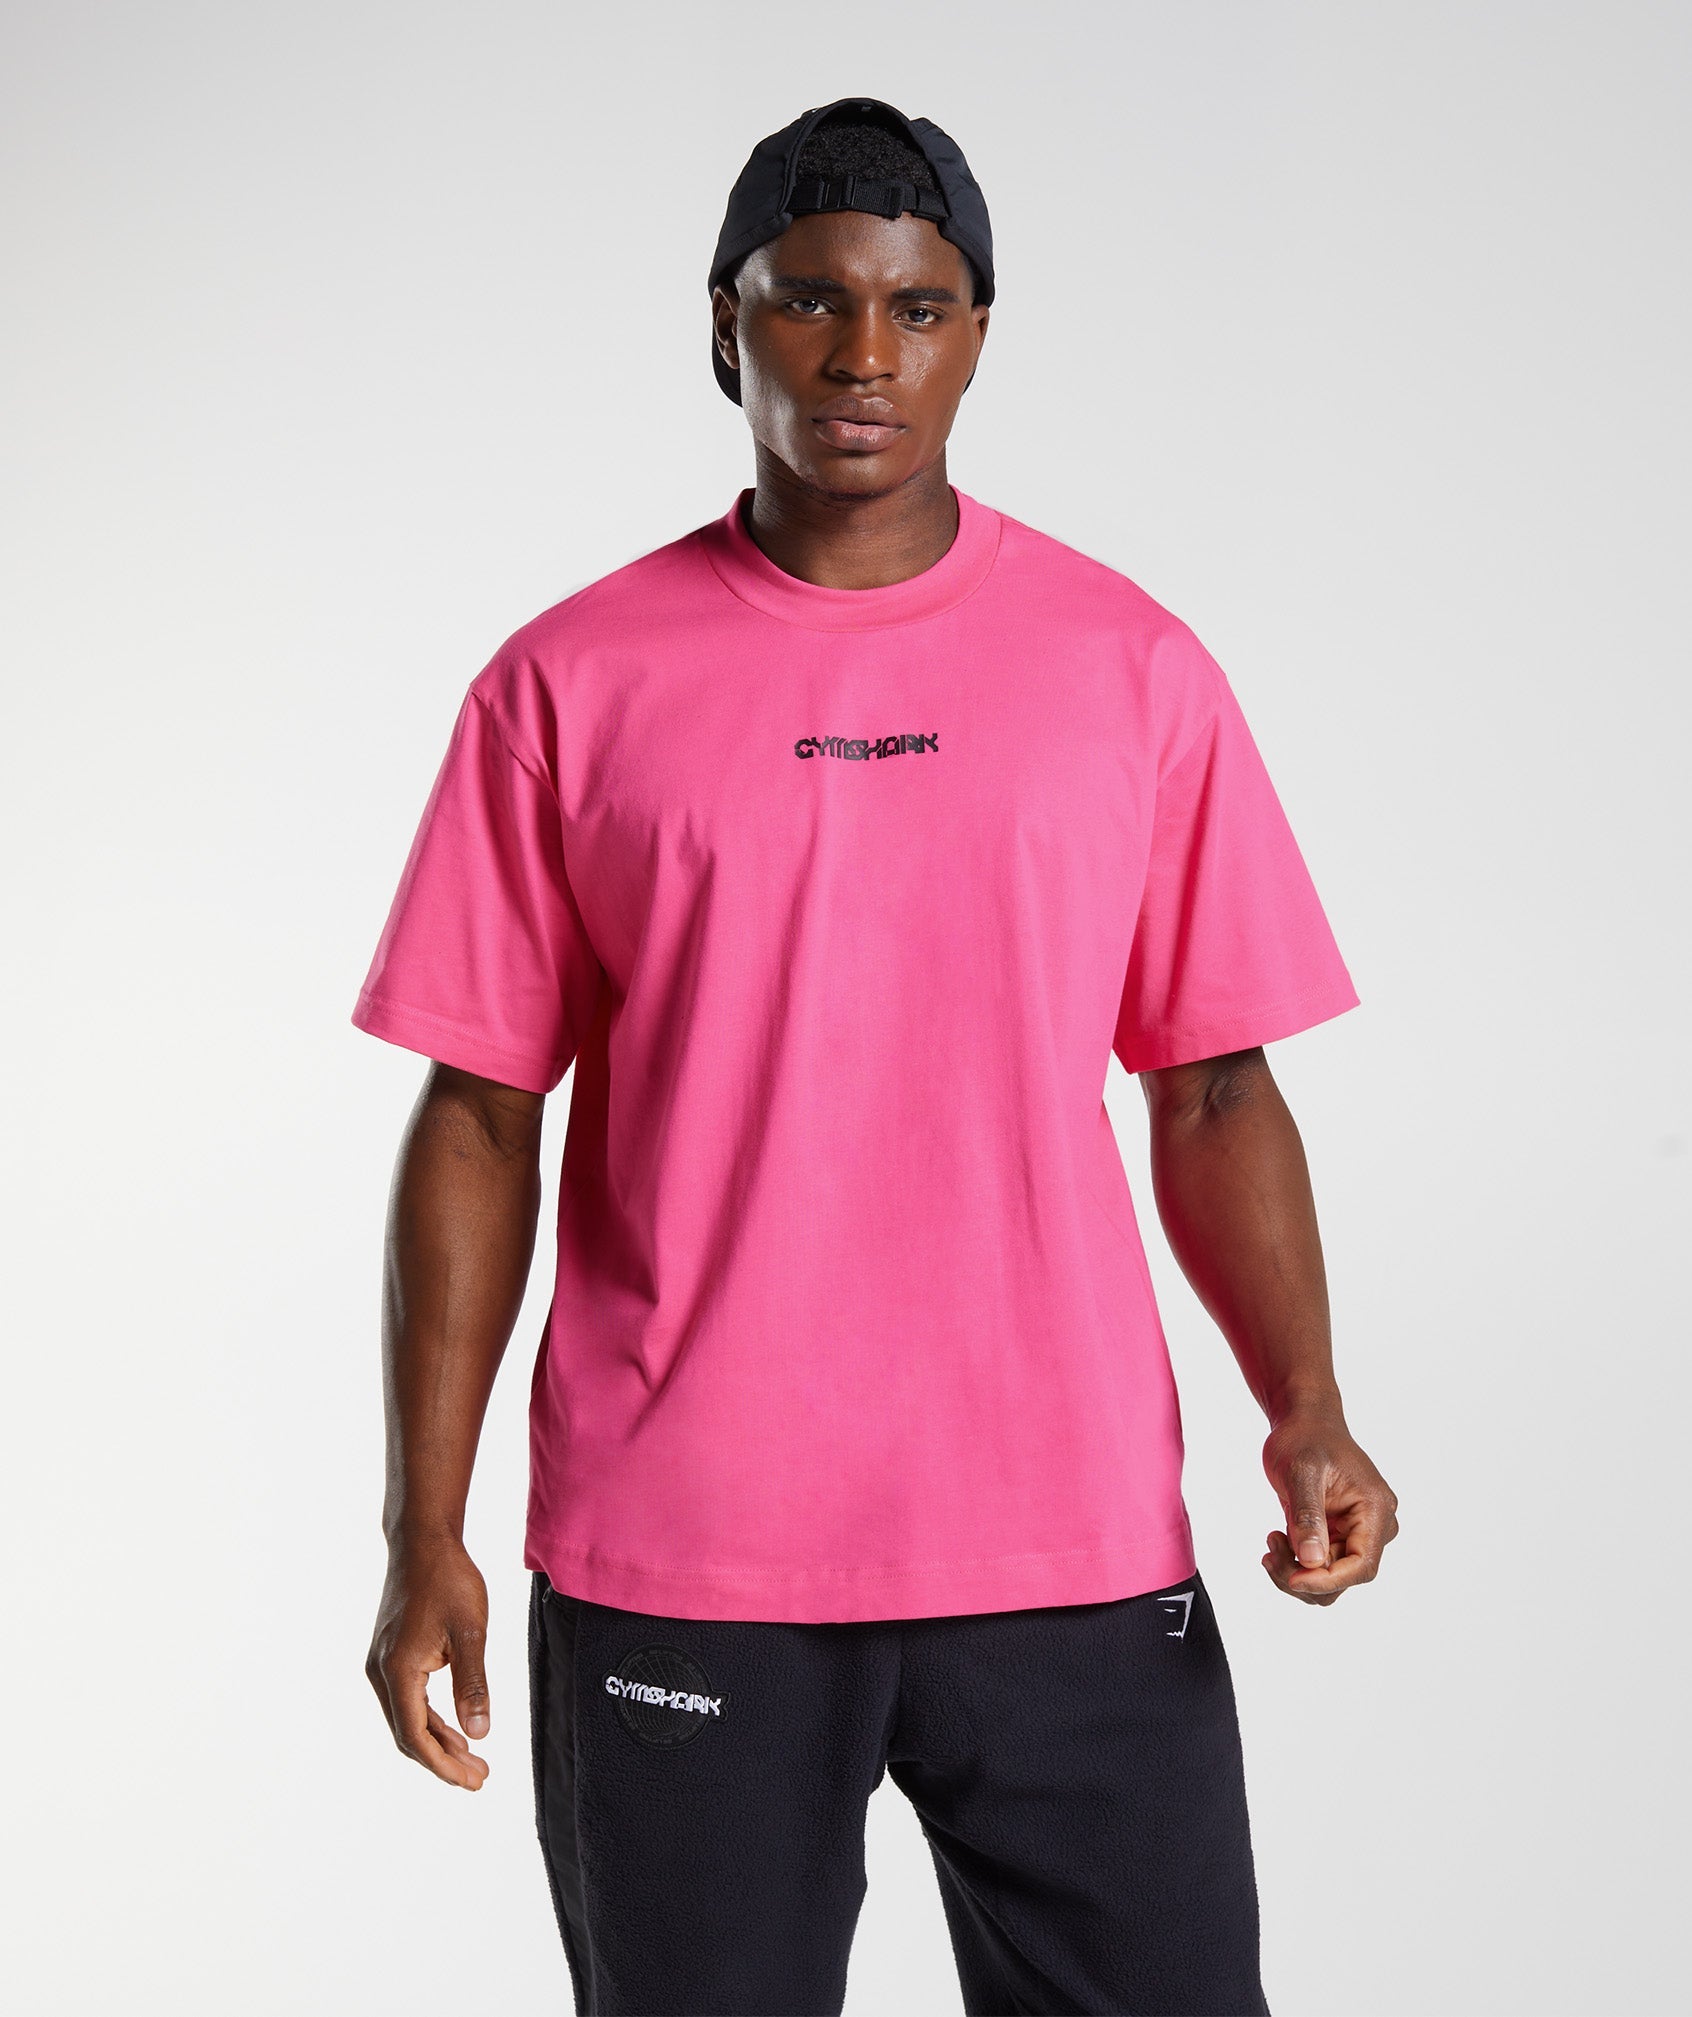 Vibes T-Shirt in Bright Fuchsia - view 1